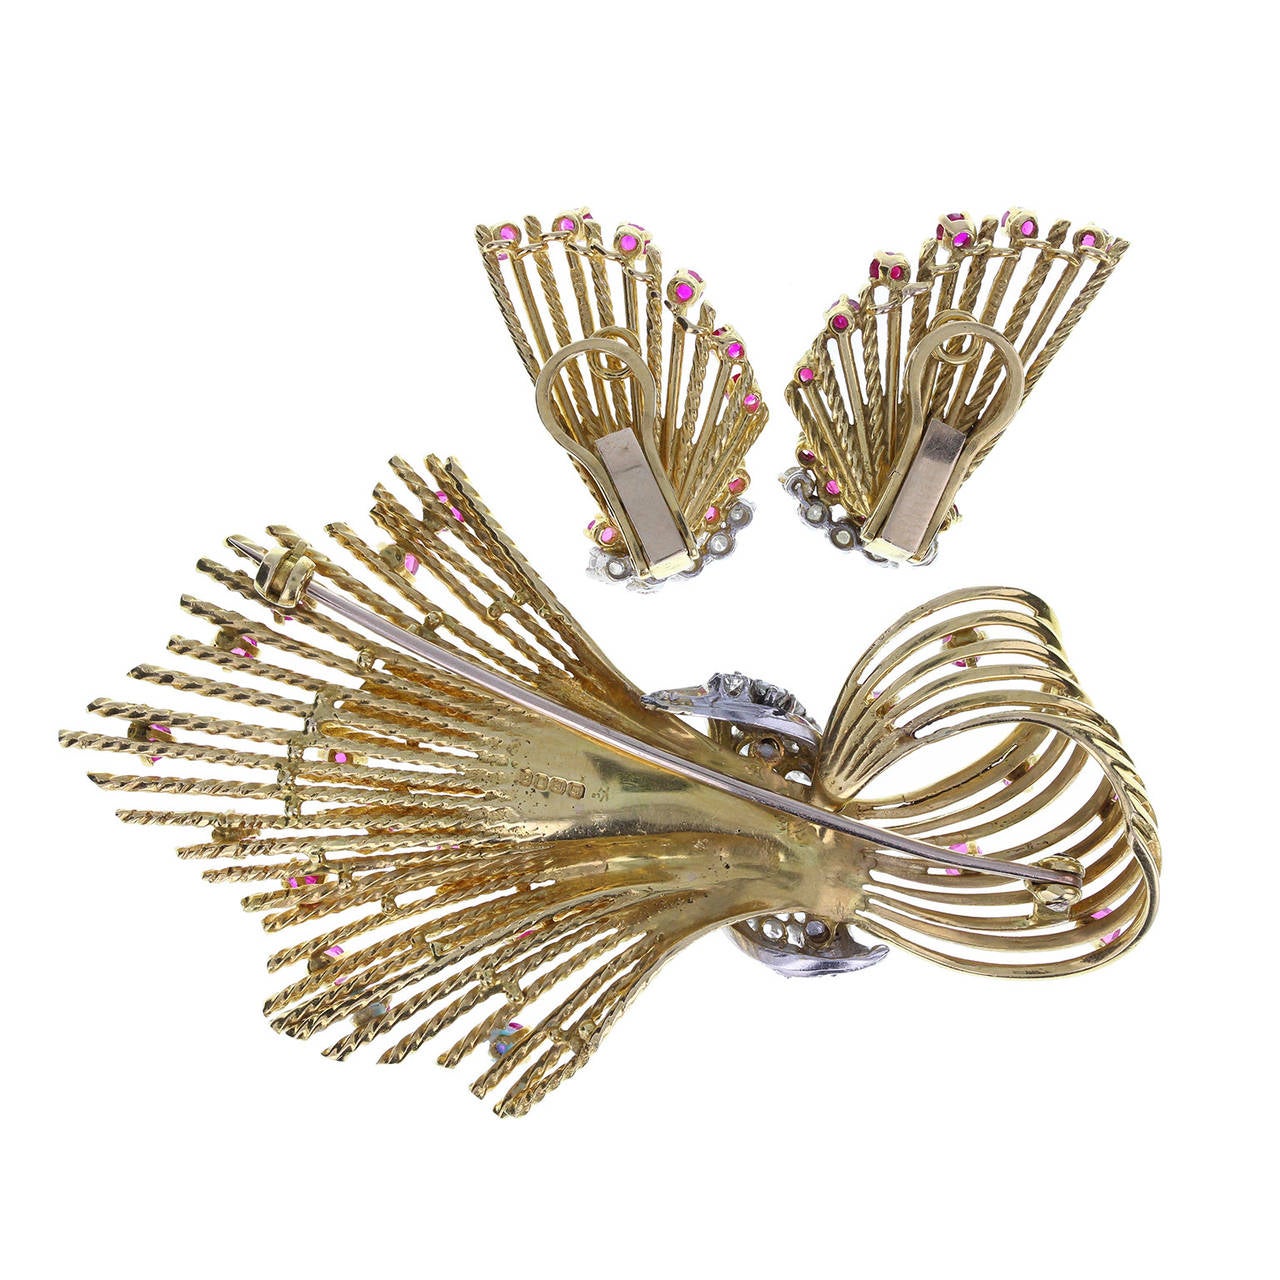 18 carat yellow gold wires twisted to form a spray brooch and matching pair of earrings. Set with round brilliant-cut diamonds on a central white gold wrap on the brooch, with randomly placed, round-cut rubies. Earrings set with a border of diamonds